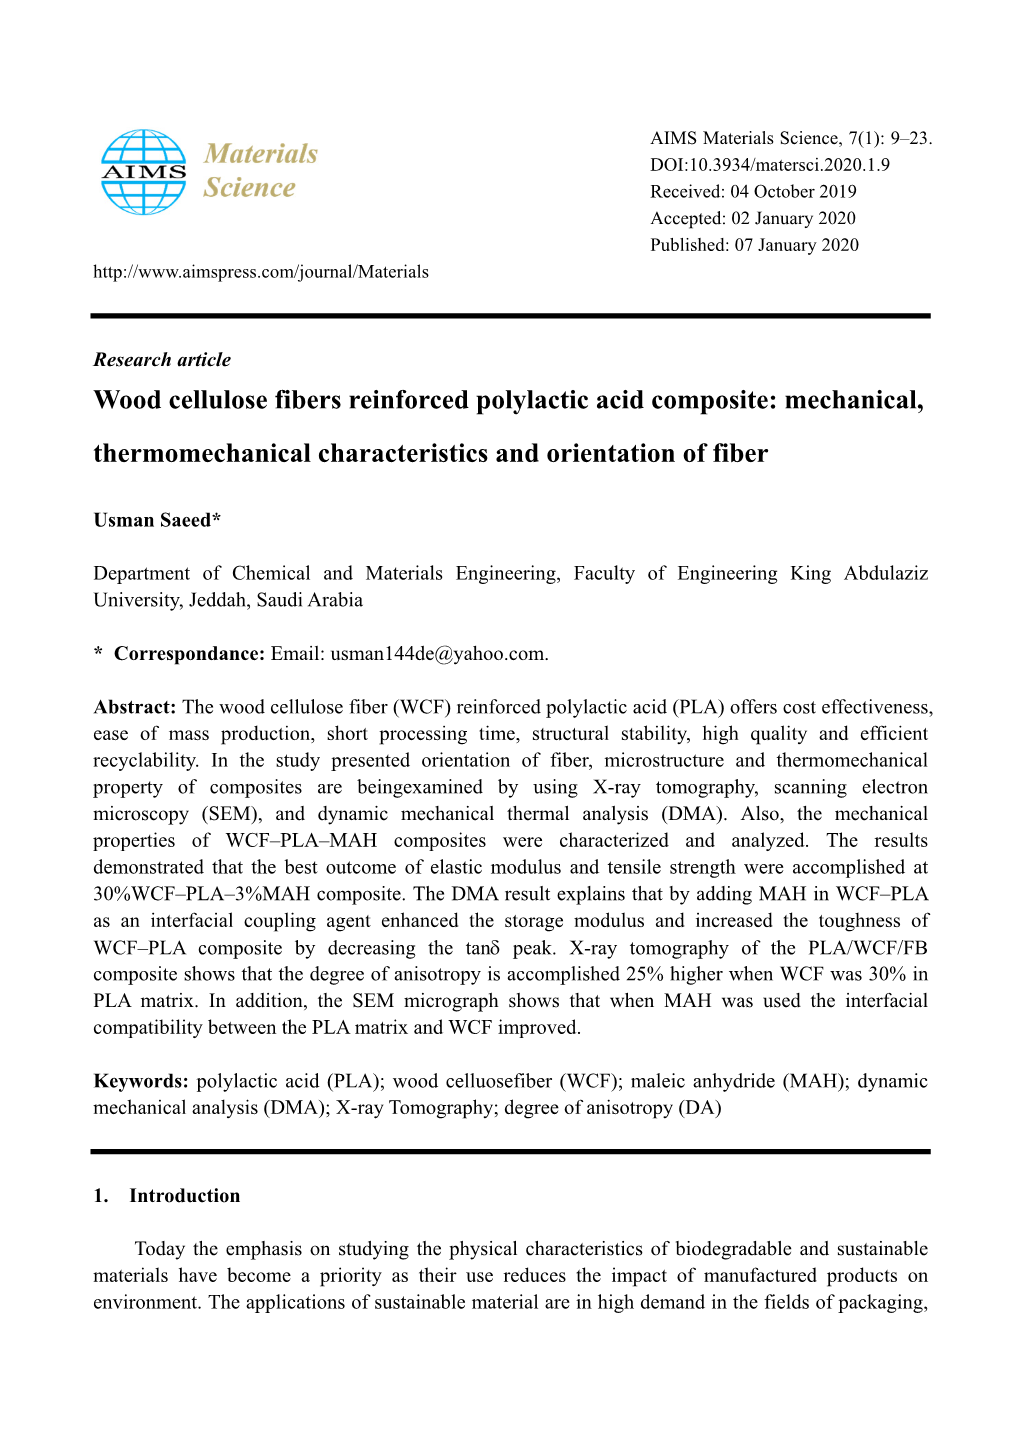 Wood Cellulose Fibers Reinforced Polylactic Acid Composite: Mechanical, Thermomechanical Characteristics and Orientation of Fiber